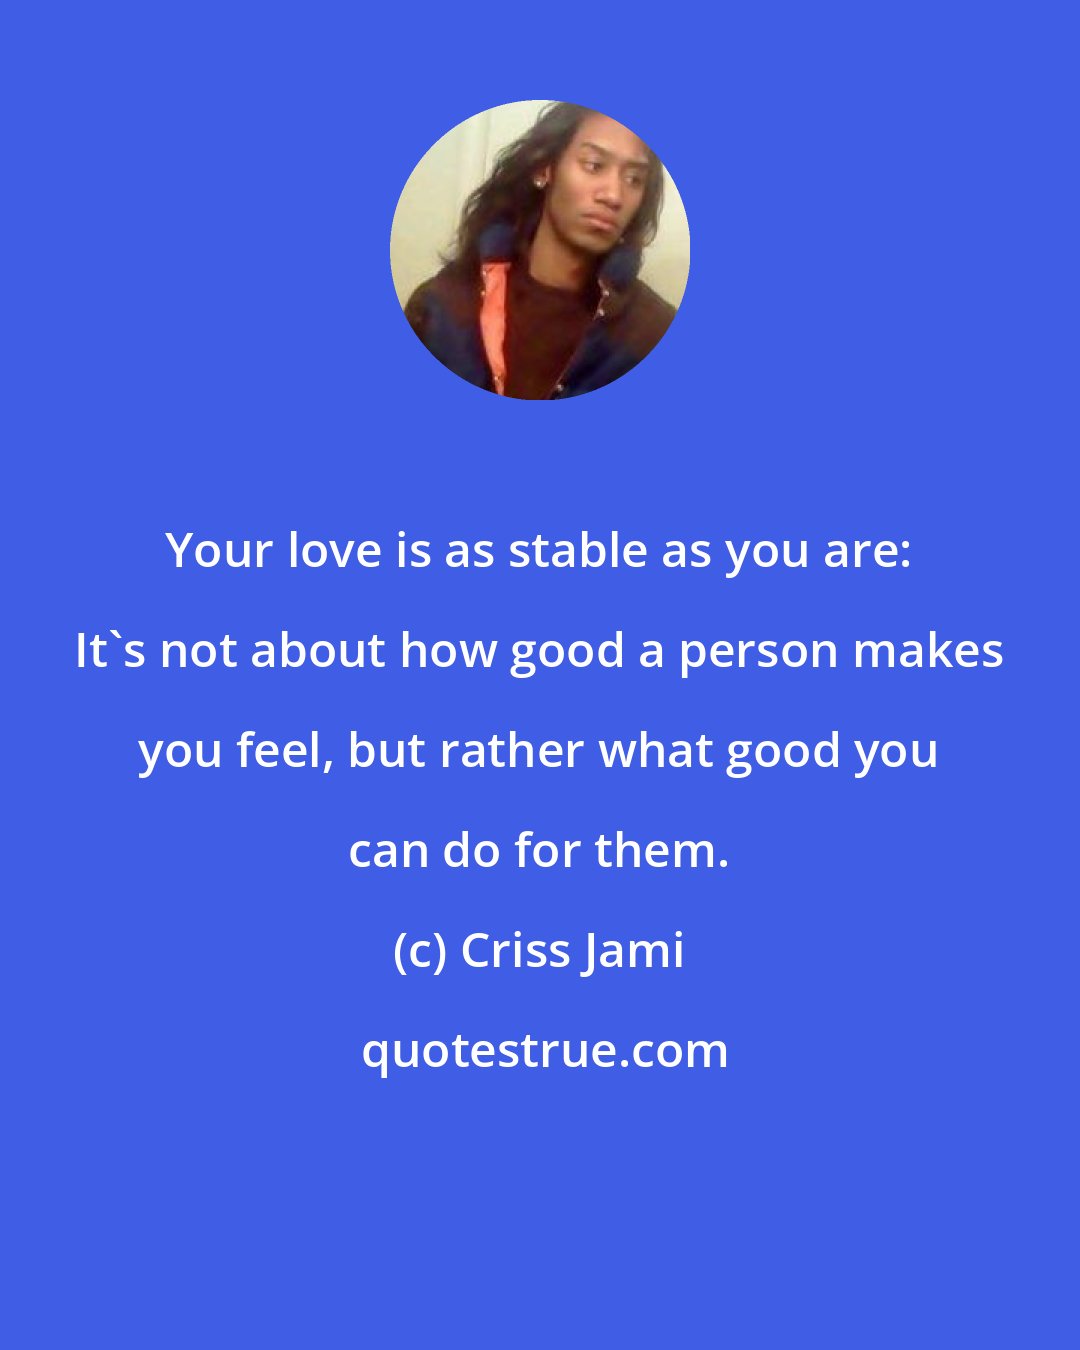 Criss Jami: Your love is as stable as you are: It's not about how good a person makes you feel, but rather what good you can do for them.